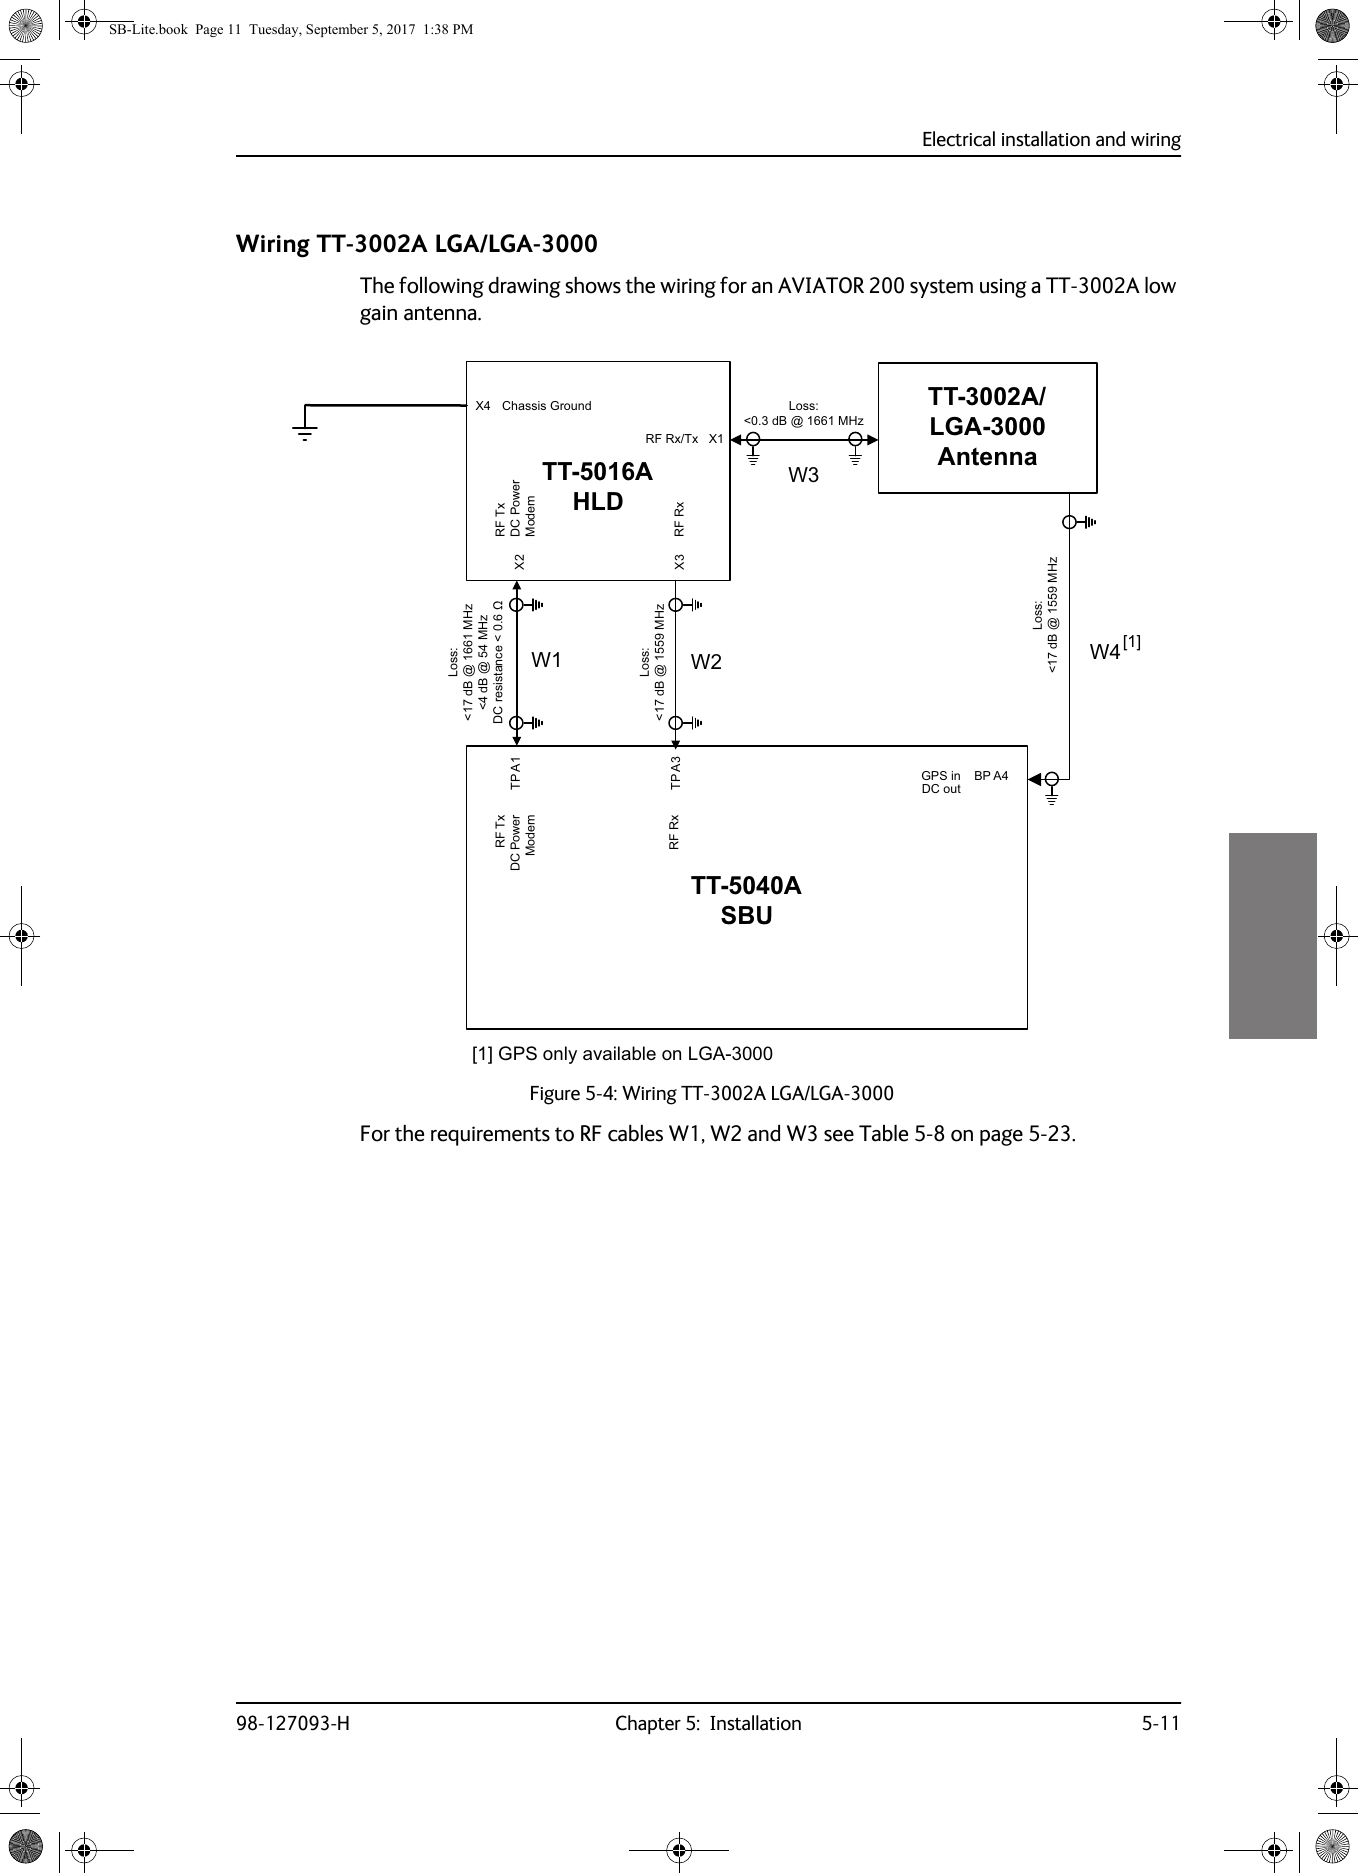 Electrical installation and wiring98-127093-H Chapter 5:  Installation 5-115555Wiring TT-3002A LGA/LGA-3000The following drawing shows the wiring for an AVIATOR 200 system using a TT-3002A low gain antenna.For the requirements to RF cables W1, W2 and W3 see Table  5-8 on page  5-23.Figure 5-4:  Wiring TT-3002A LGA/LGA-300077$6%877$+/&apos;73$73$;;;%3$*36LQ&apos;&amp;RXW: ::;77$/*$$QWHQQD/RVVG%#0+]/RVVG%#0+]/RVVG%#0+]G%#0+]&apos;&amp;UHVLVWDQFHȍ5)7[&apos;&amp;3RZHU0RGHP5)5[5)7[&apos;&amp;3RZHU0RGHP&amp;KDVVLV*URXQG5)5[7[5)5[:/RVVG%#0+]&gt;@*36RQO\DYDLODEOHRQ/*$&gt;@SB-Lite.book  Page 11  Tuesday, September 5, 2017  1:38 PM